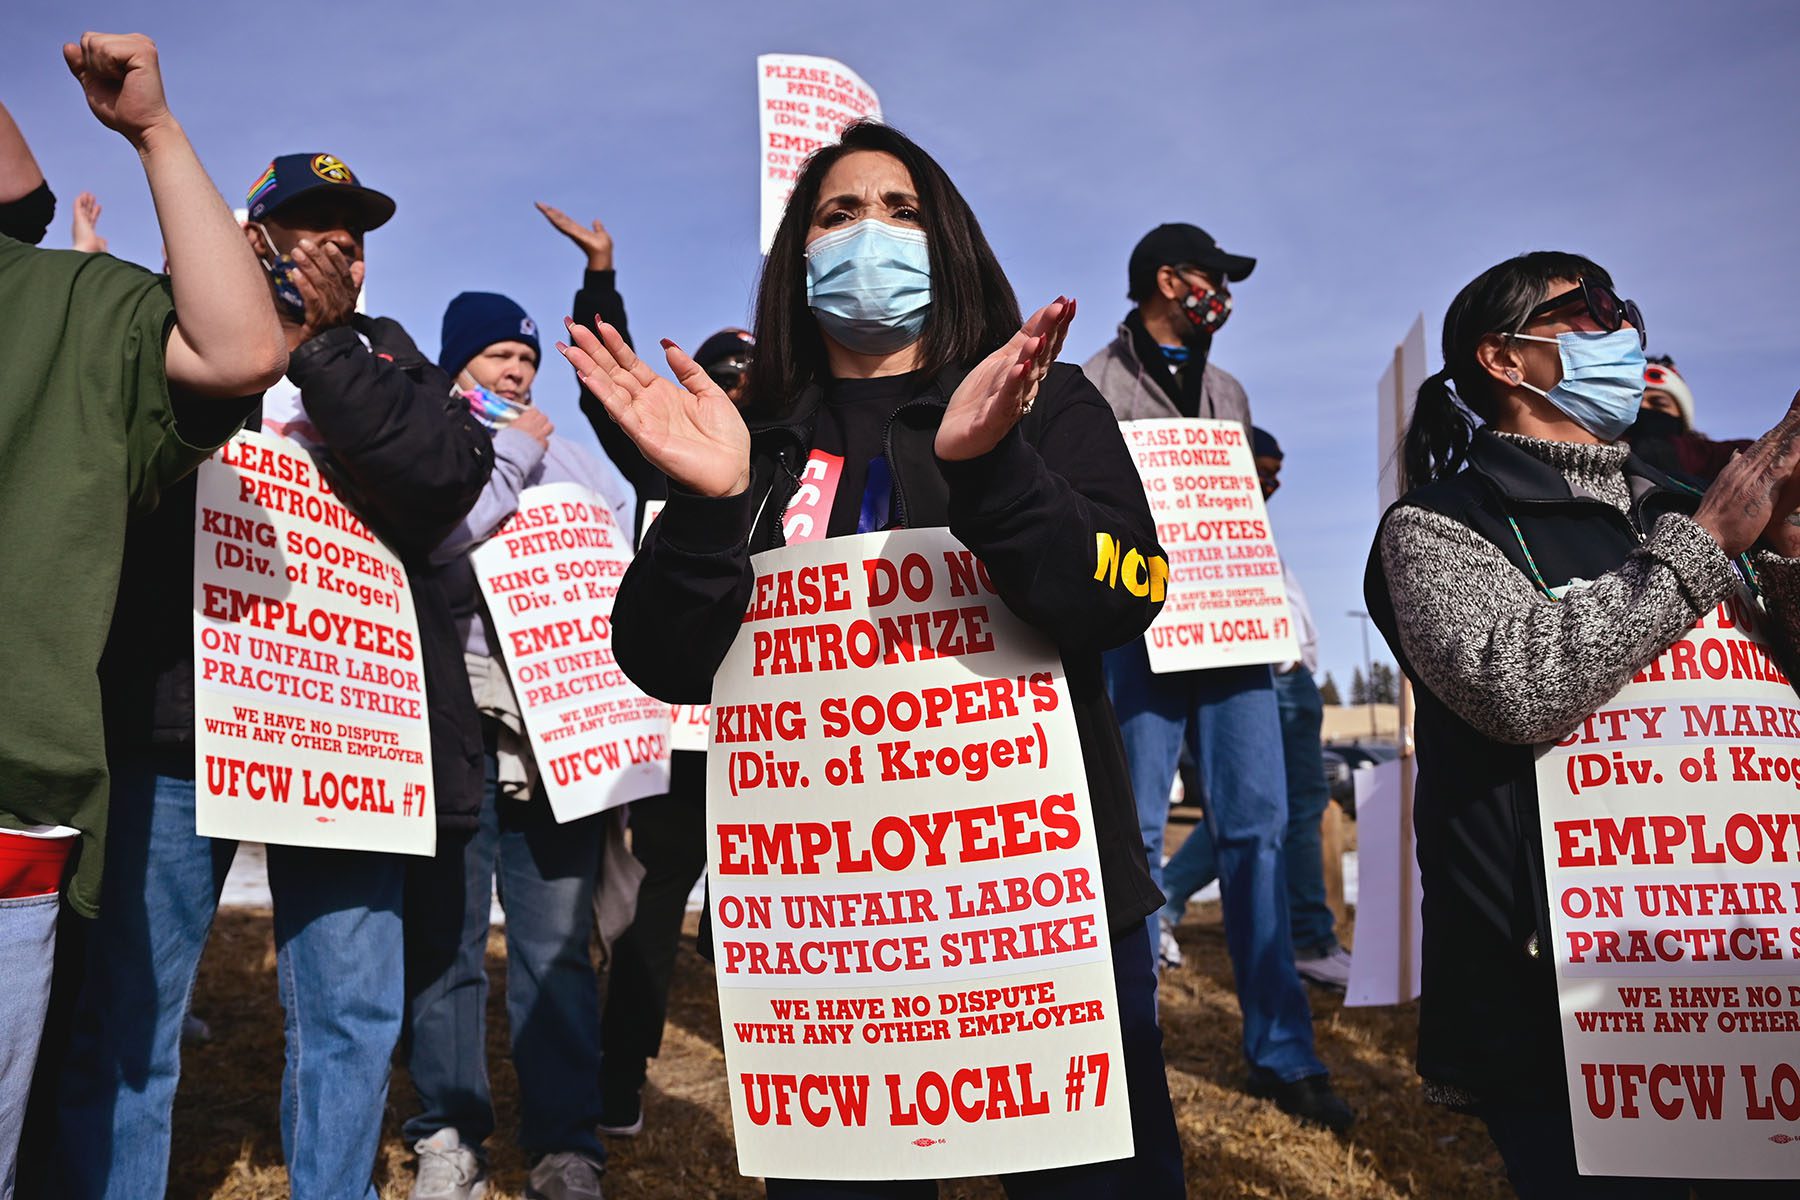 Kim Cordova leads a rally. She is surrounded by striking employees holding signs that read "Please do not patronize King Sooper's. Emplyees on unfair labor practice strike. we have no dispute with any other employer."